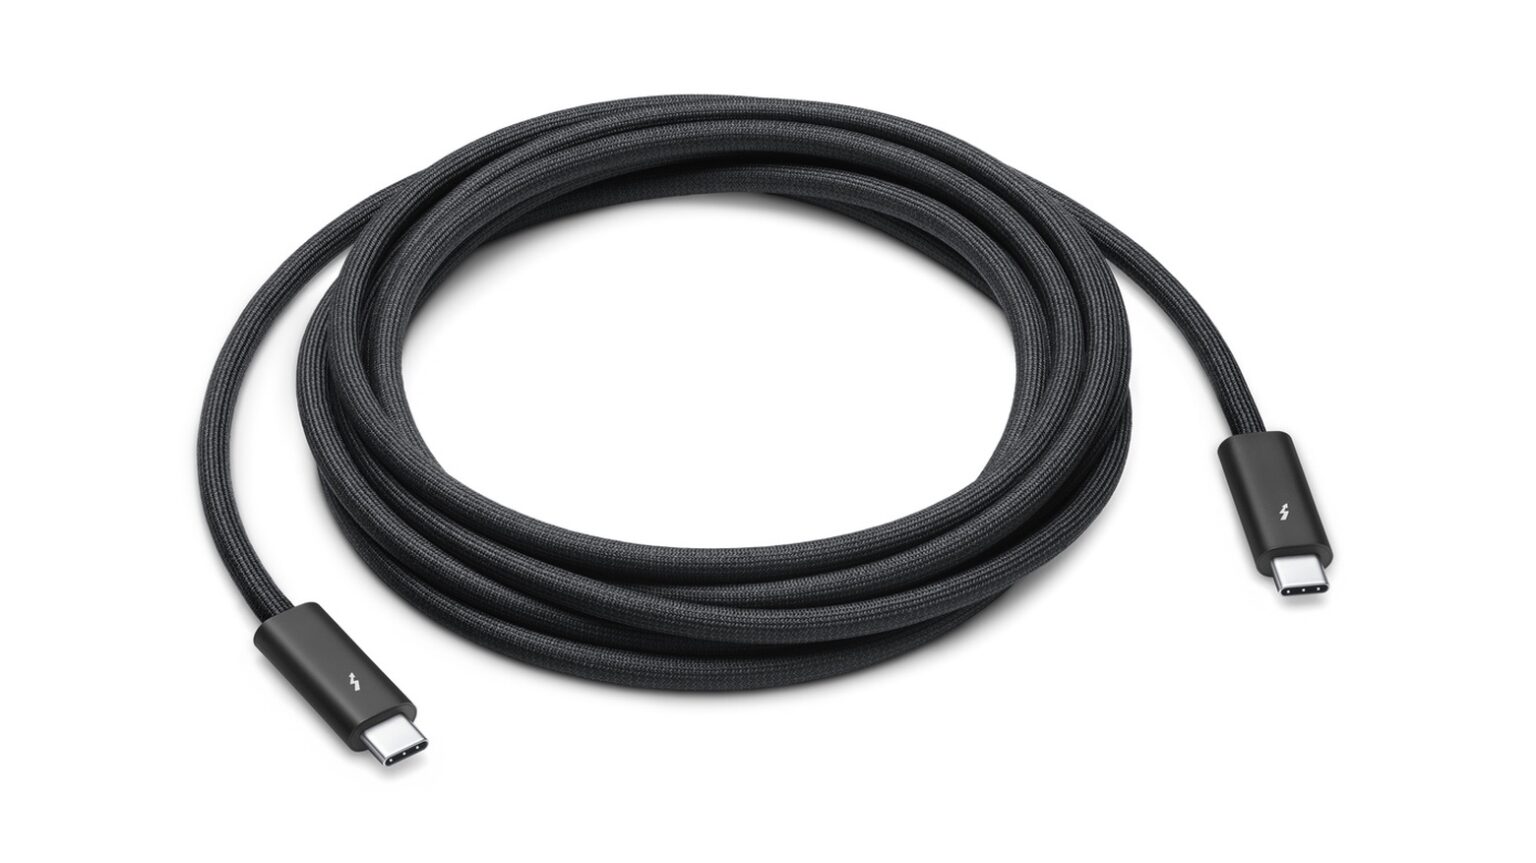 Apple’s 3-meter Thunderbolt 4 cable